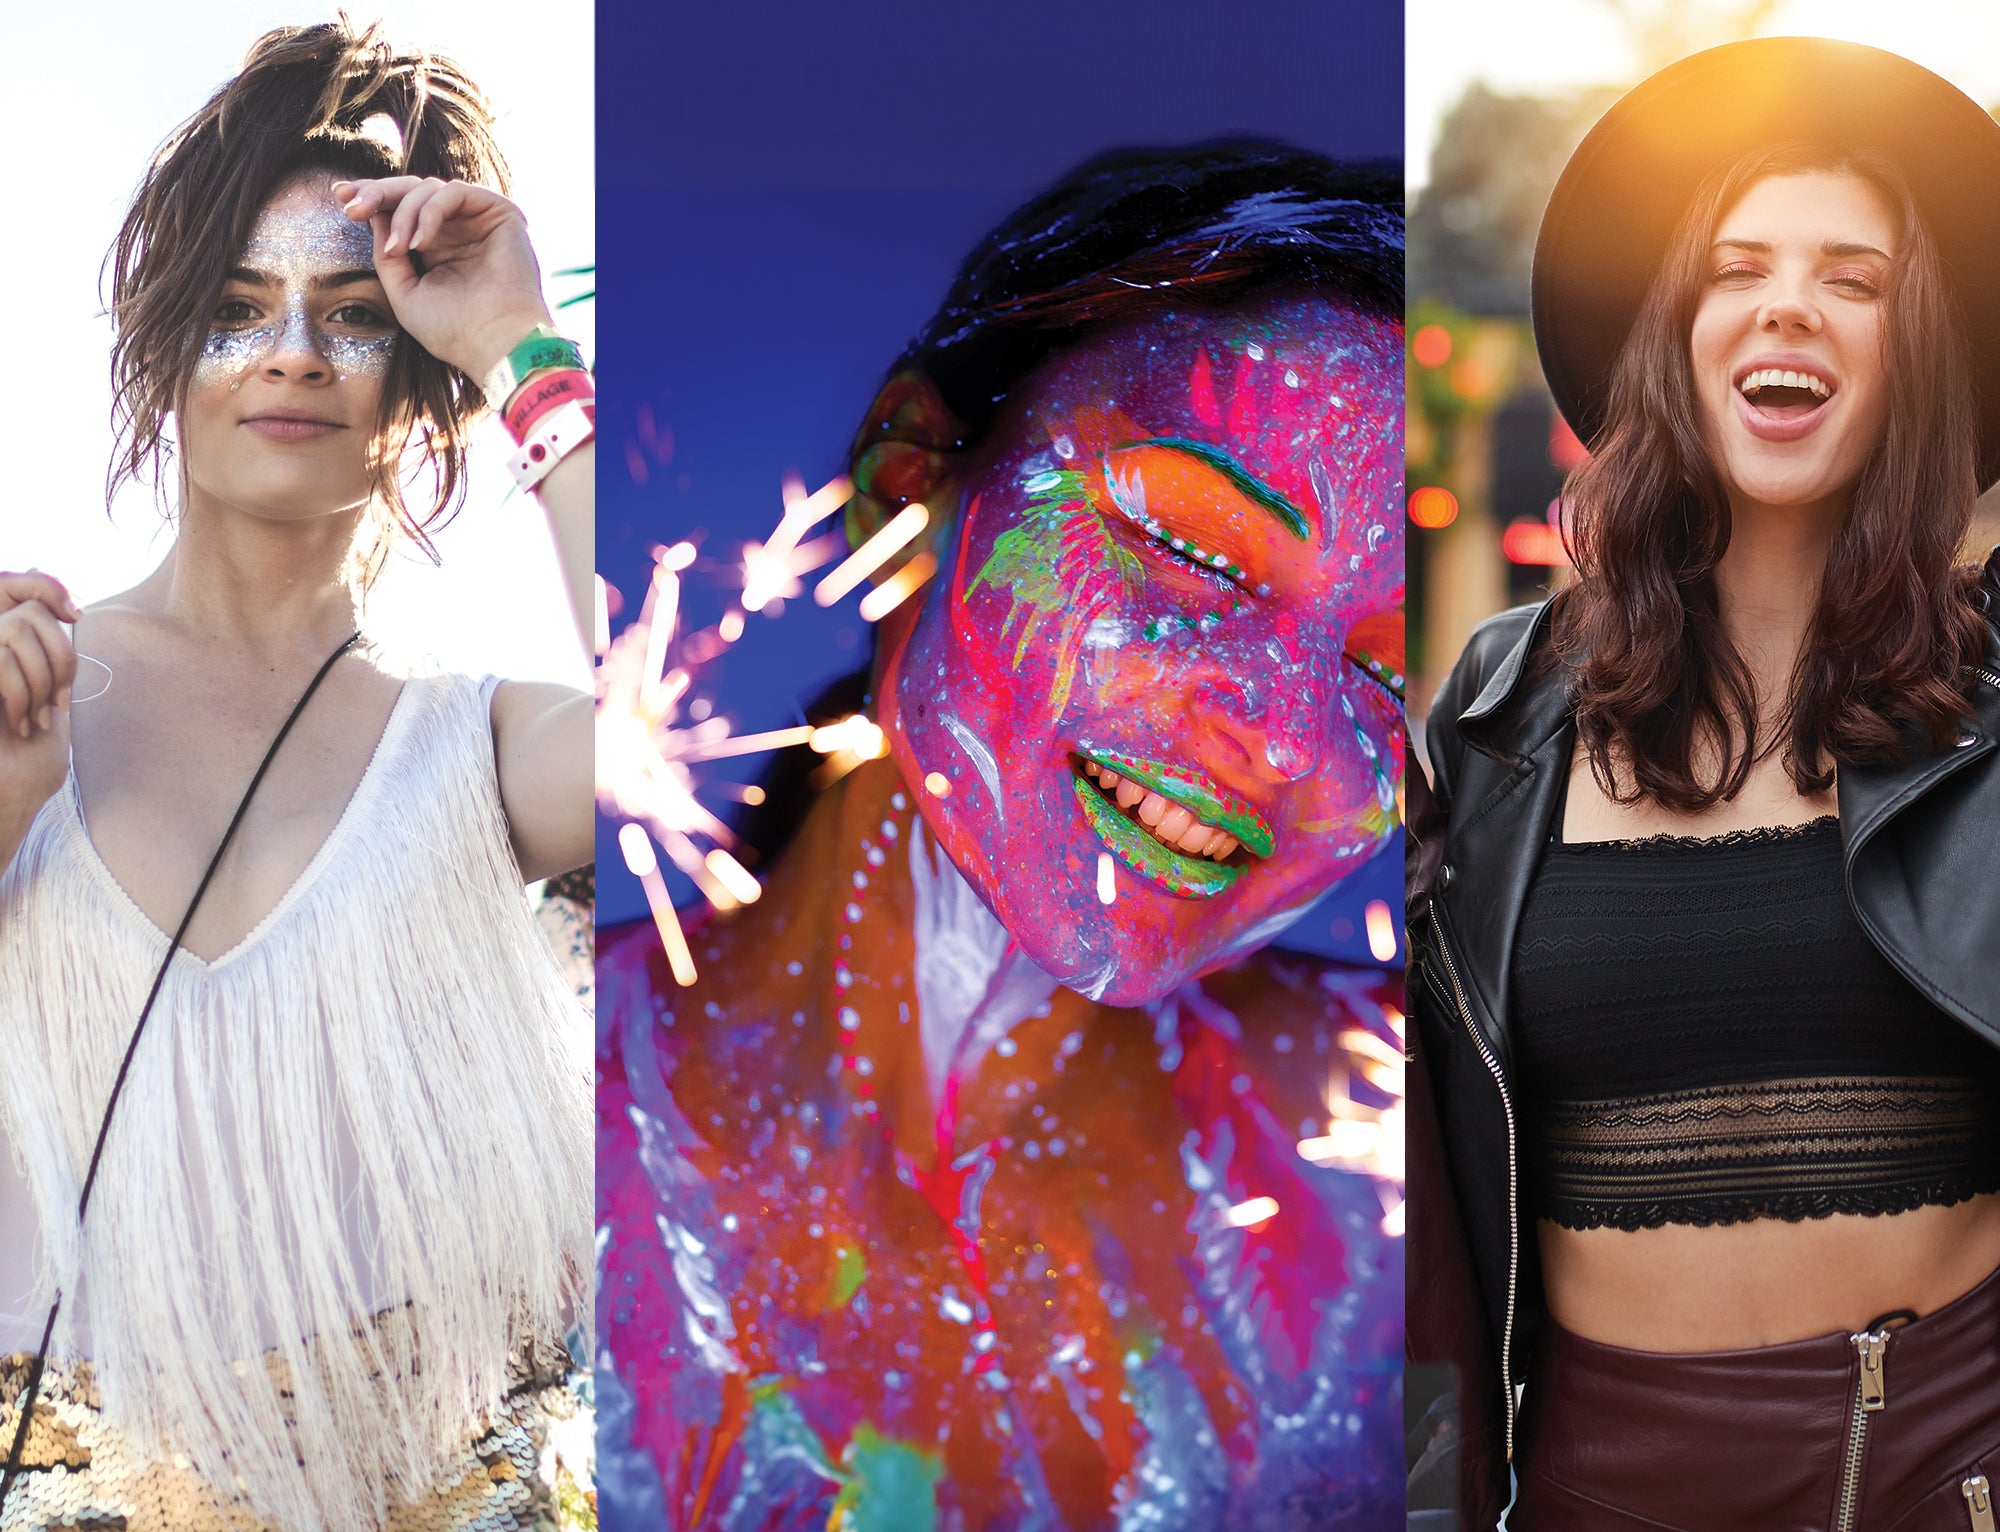 What's Your Summer Music Festival Piercing Personality?